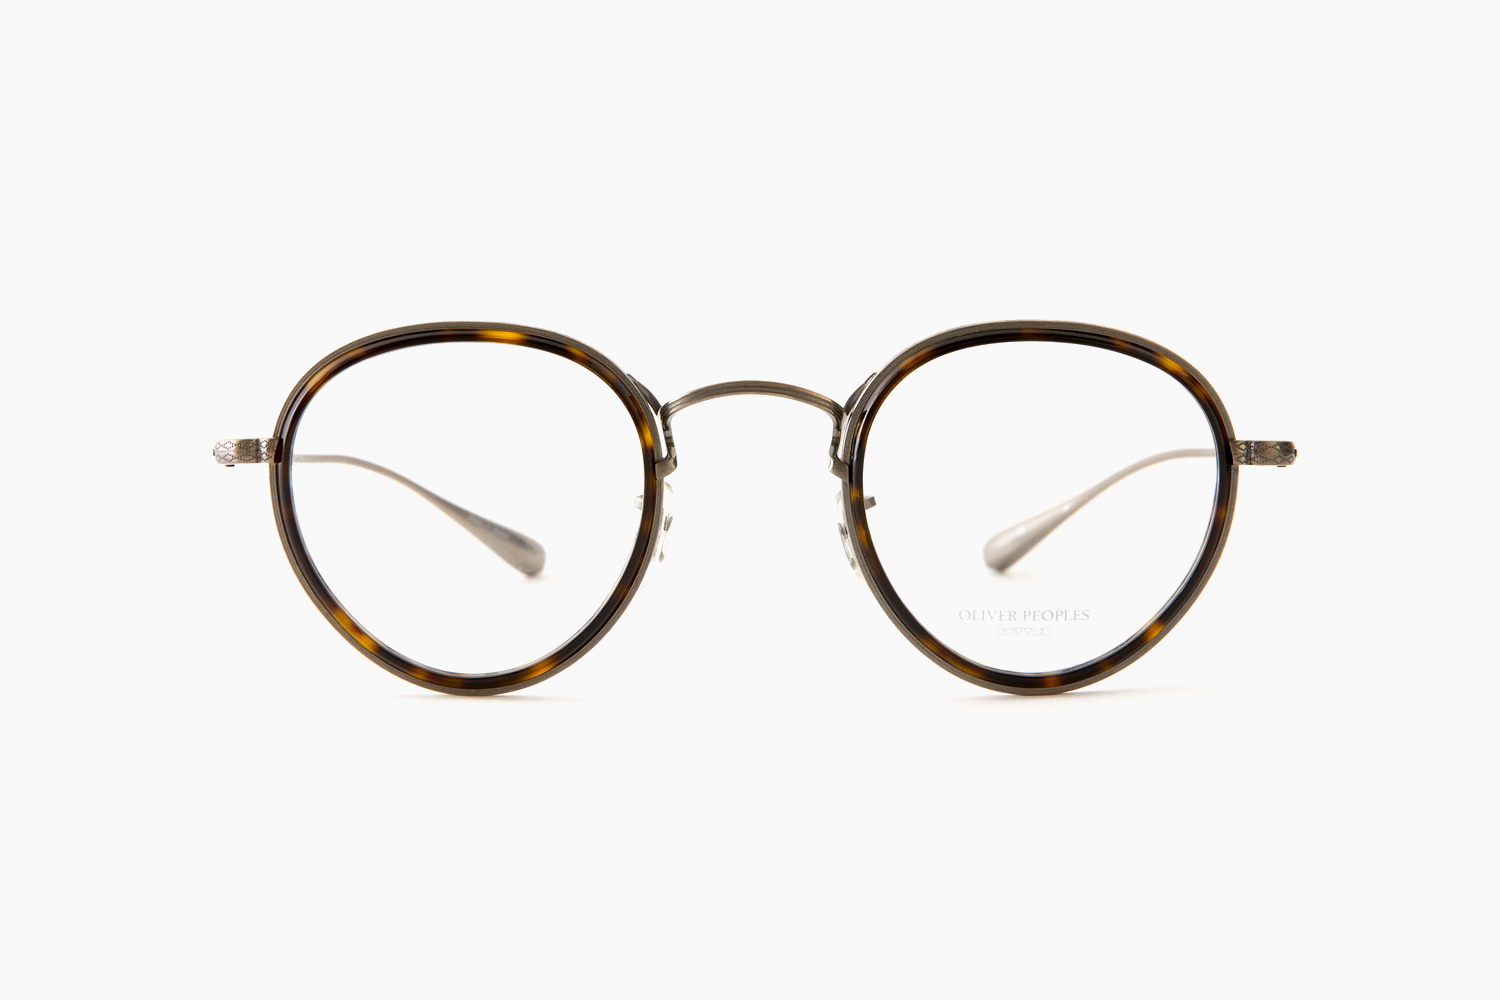 Darville - 362P｜OLIVER PEOPLES